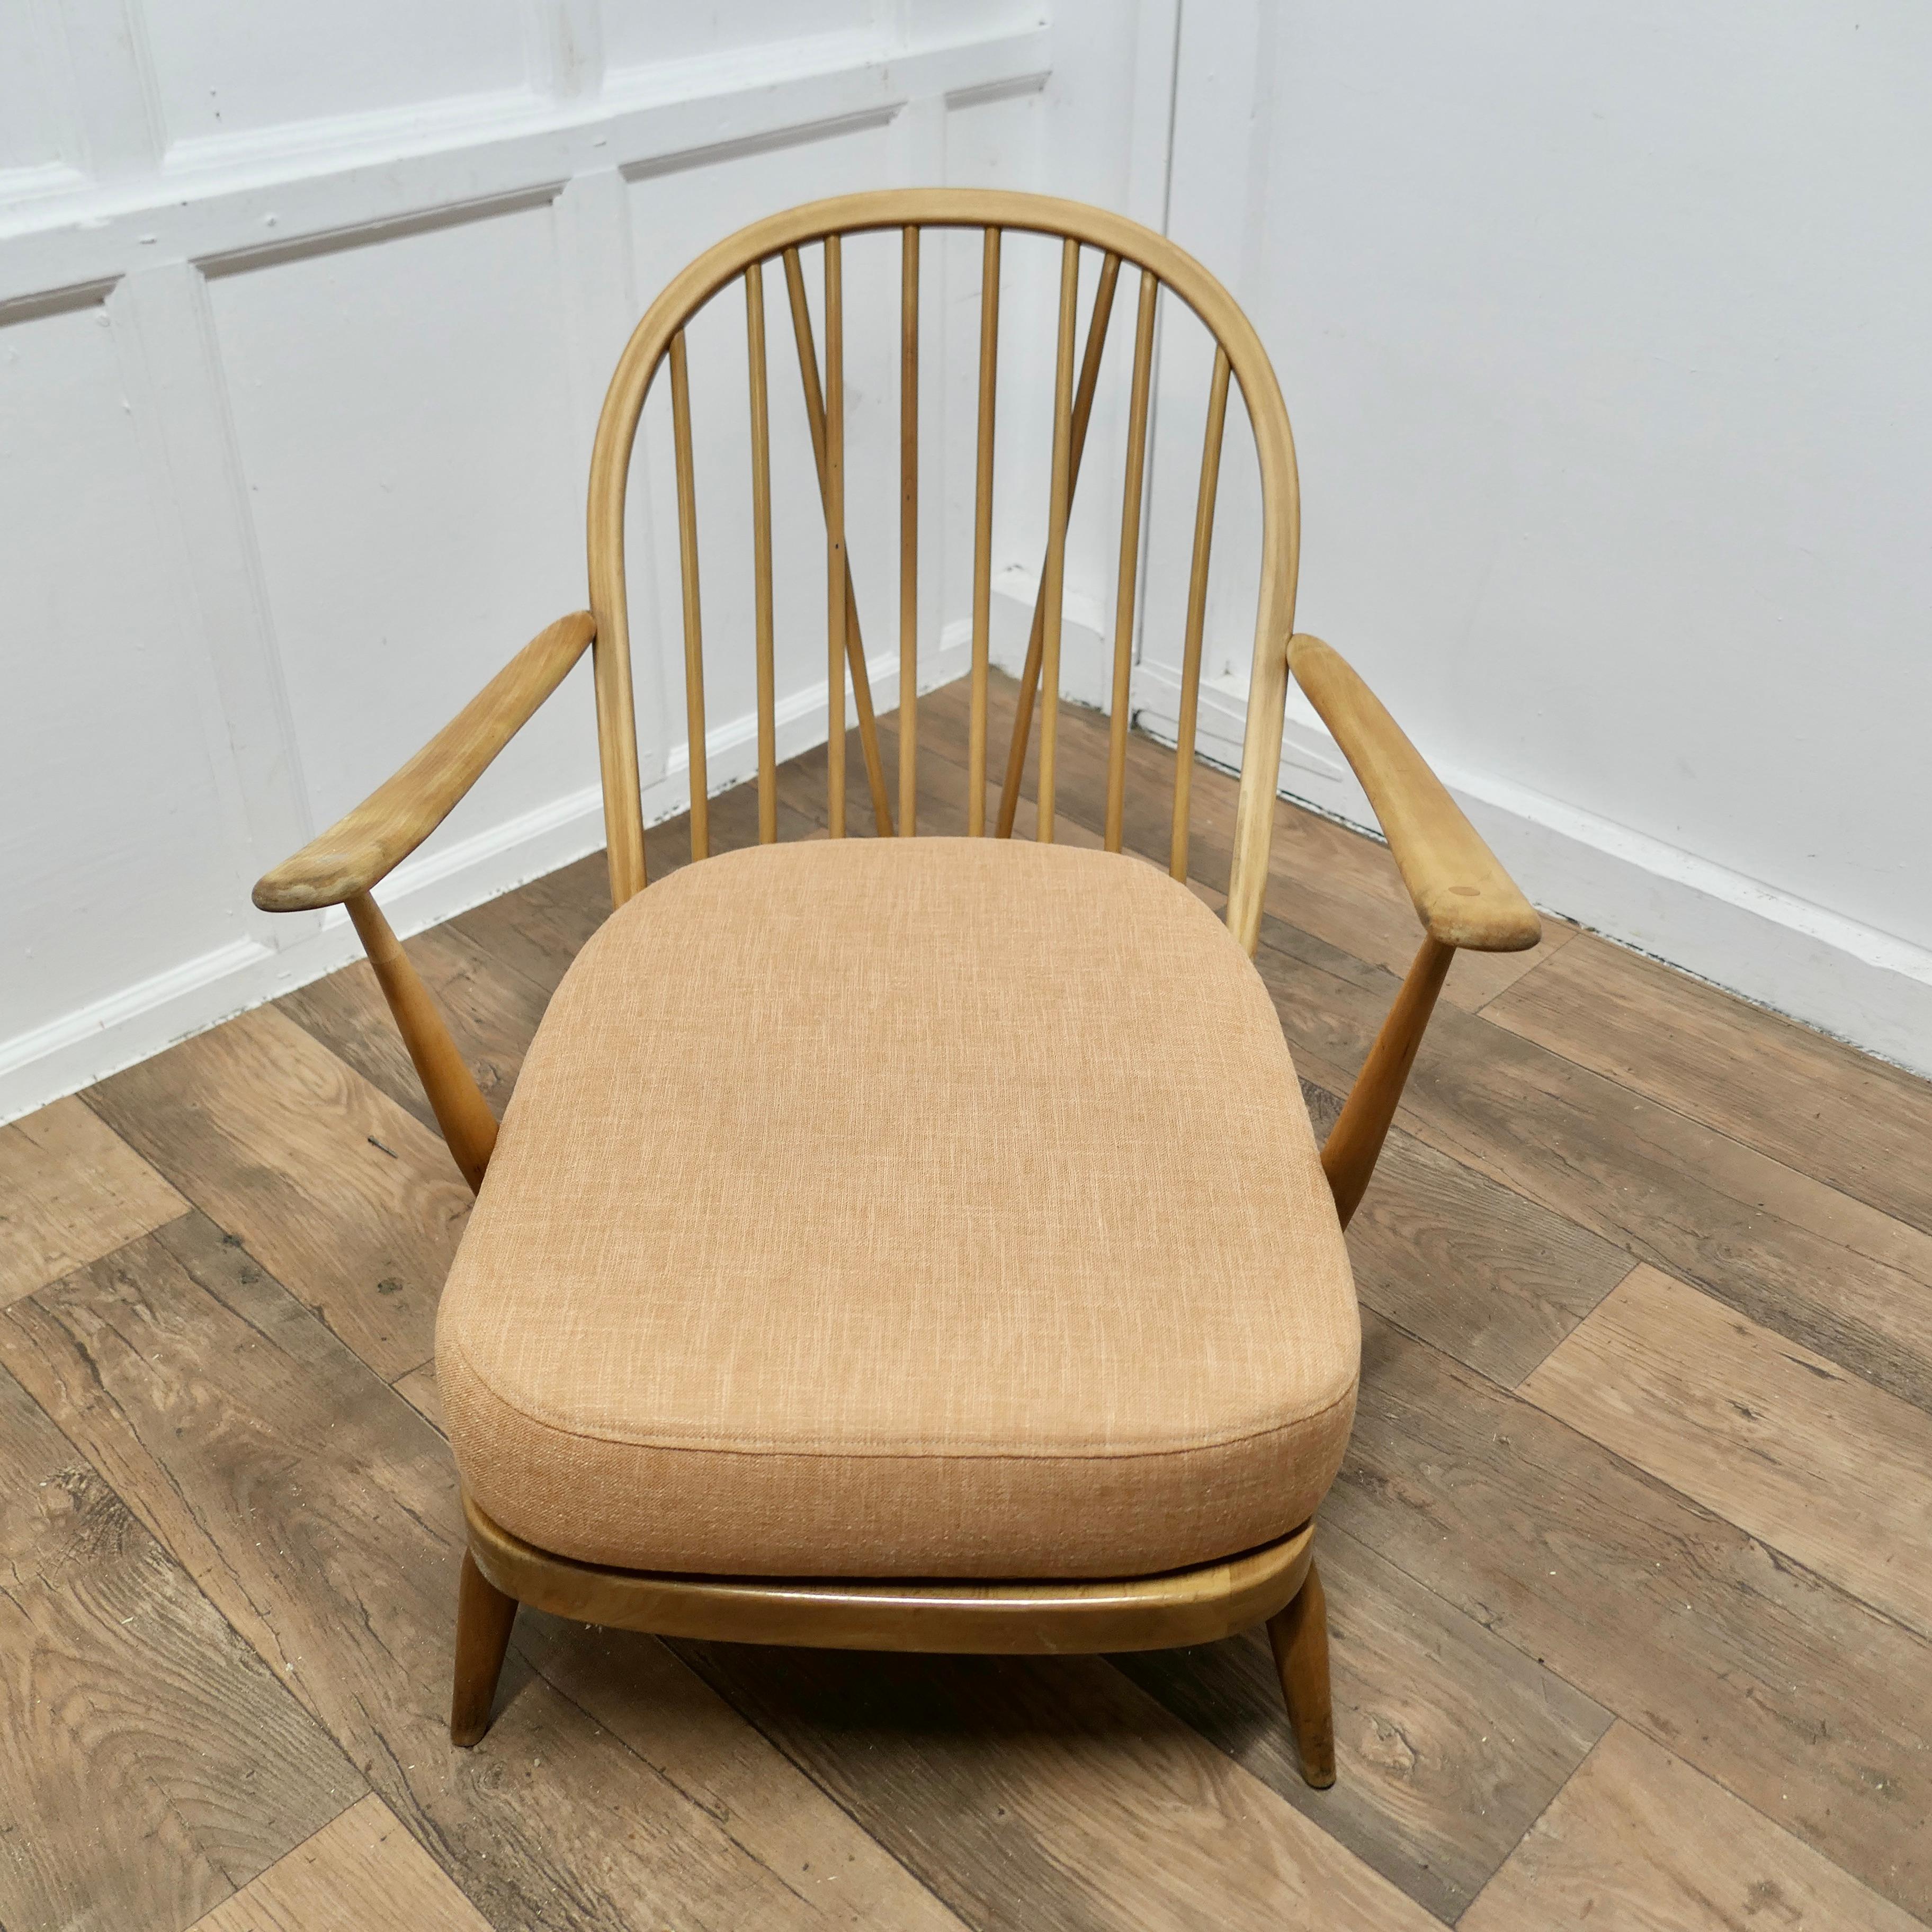 Mid-20th Century Ercol Windsor Easy Chair   The chair is a classic design and traditionally made  For Sale